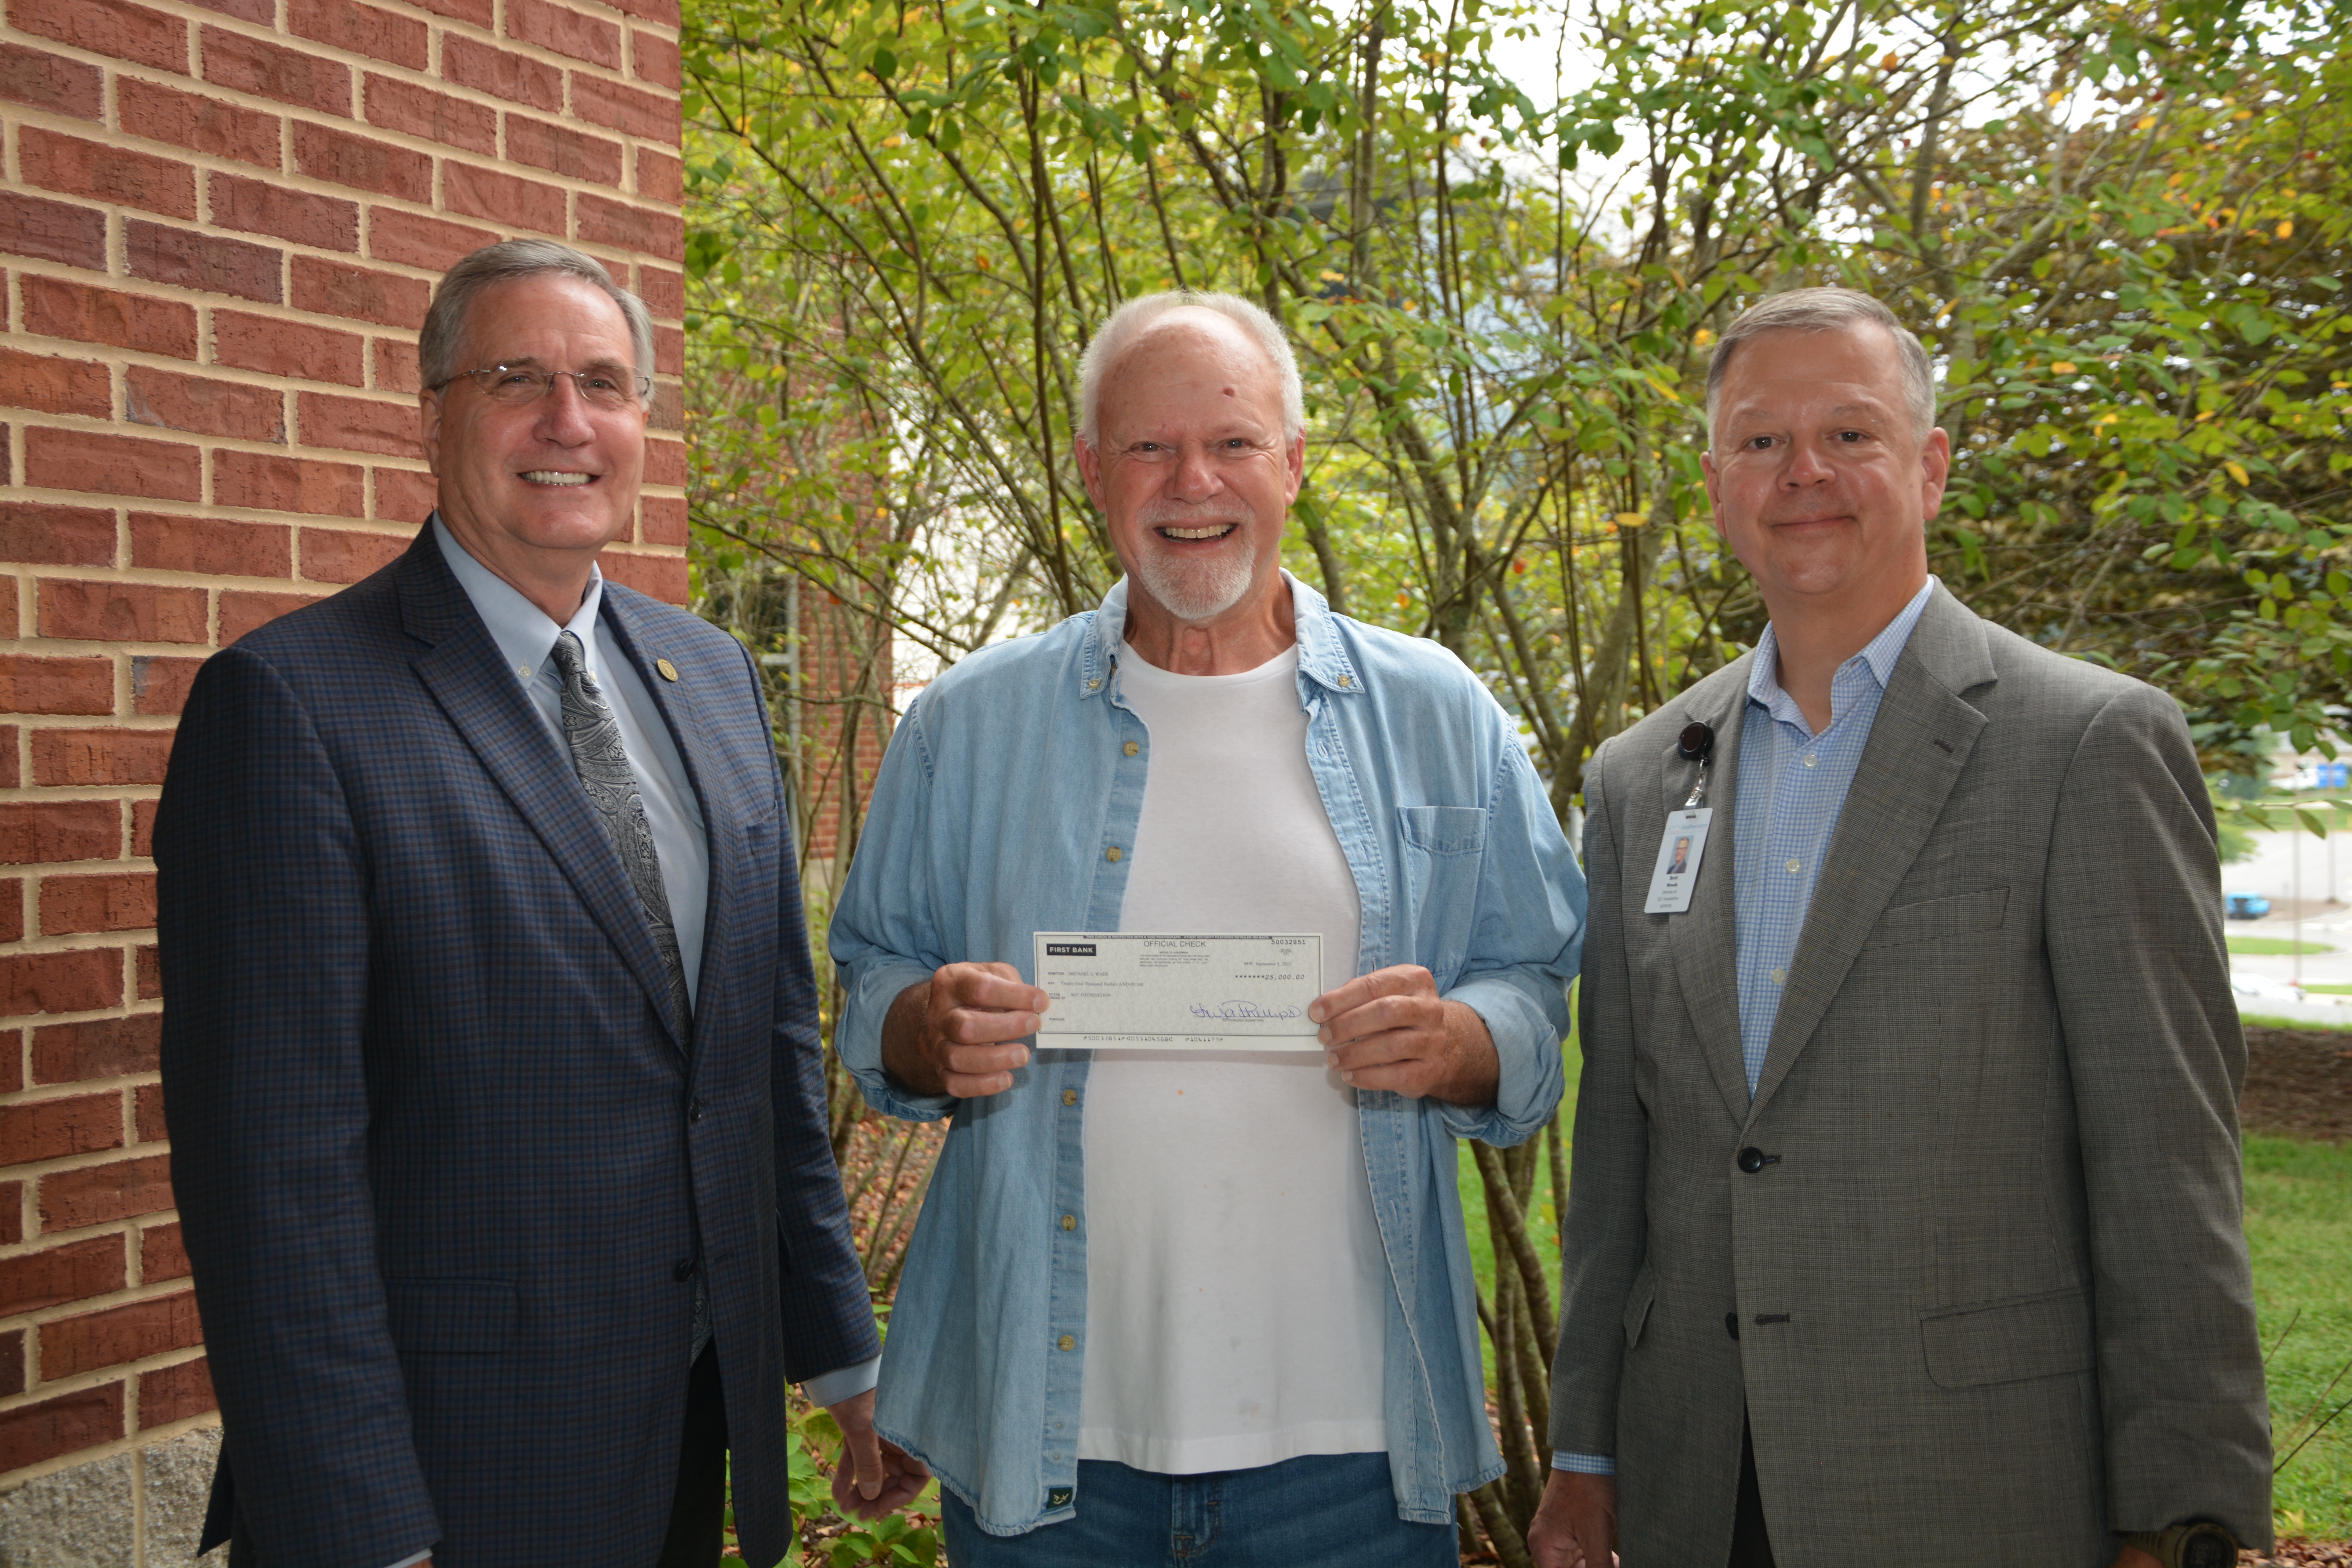 Mike Wade (center) stands between Dr. Don Tomas, SCC's President, and Brett Woods, Director of the SCC Foundation